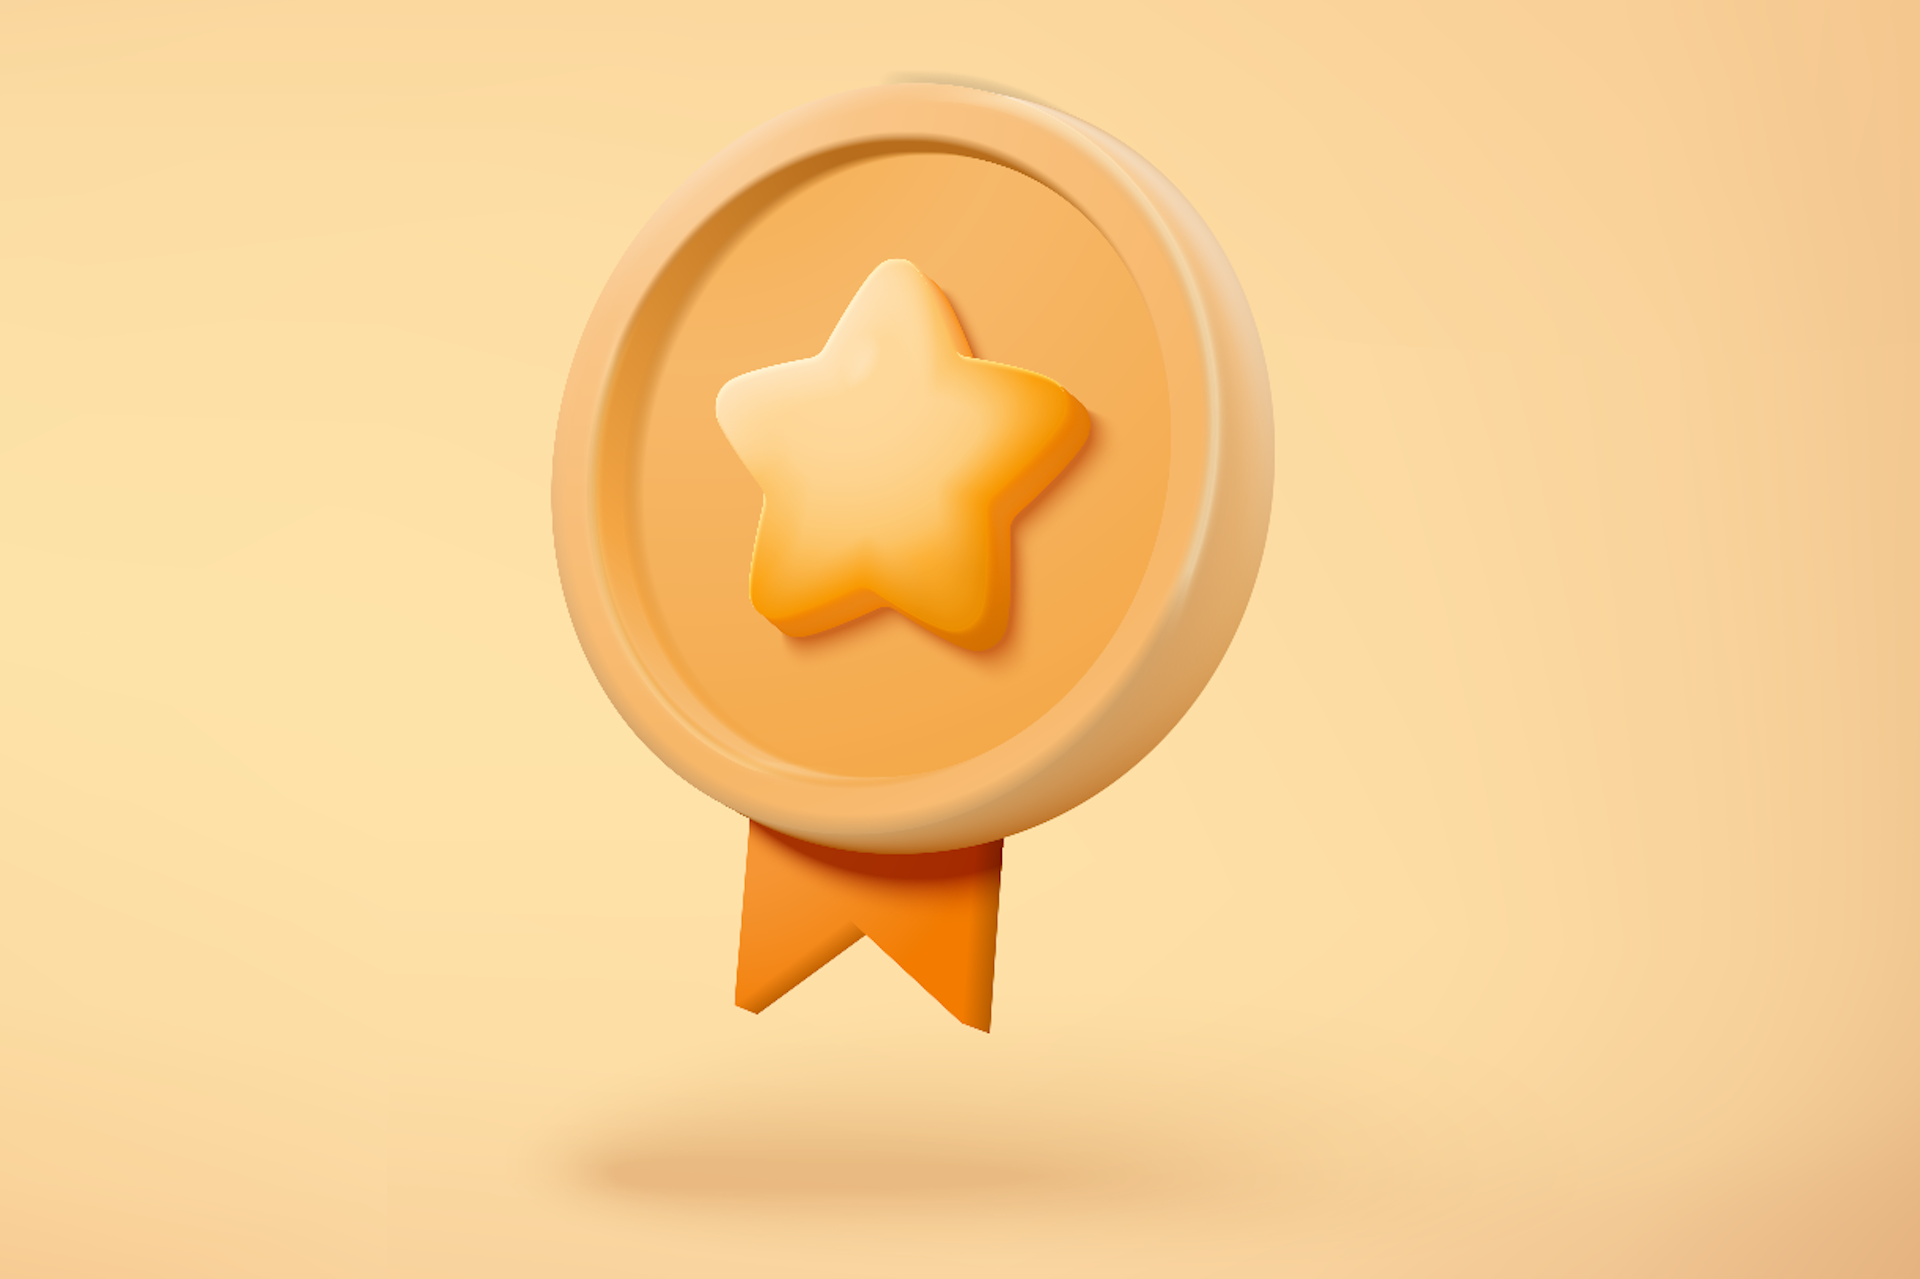 Image showing a large yellow star in the middle of a gold medal, on a light gold background. Blog post for the best 13 influencer marketing platforms.